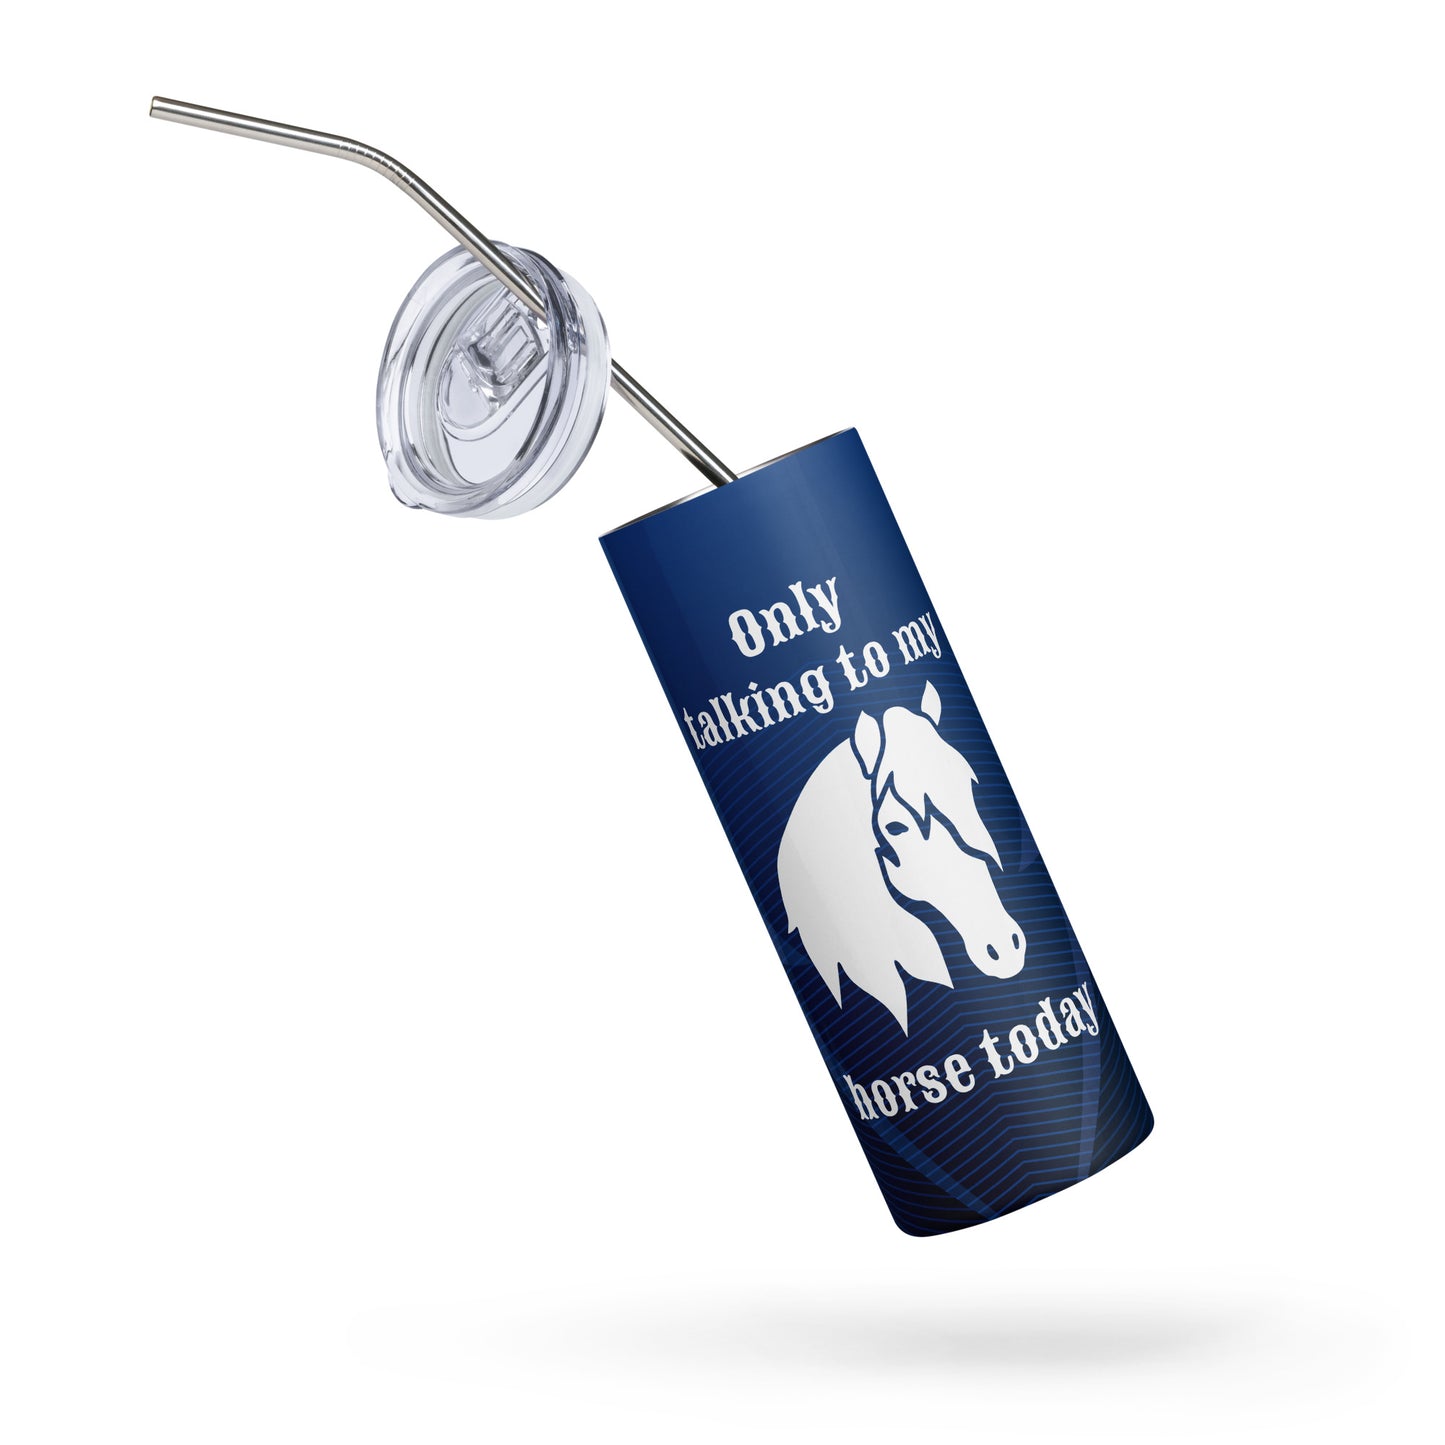 Only Talking to my Horse Today - Navy Blue - Stainless steel tumbler